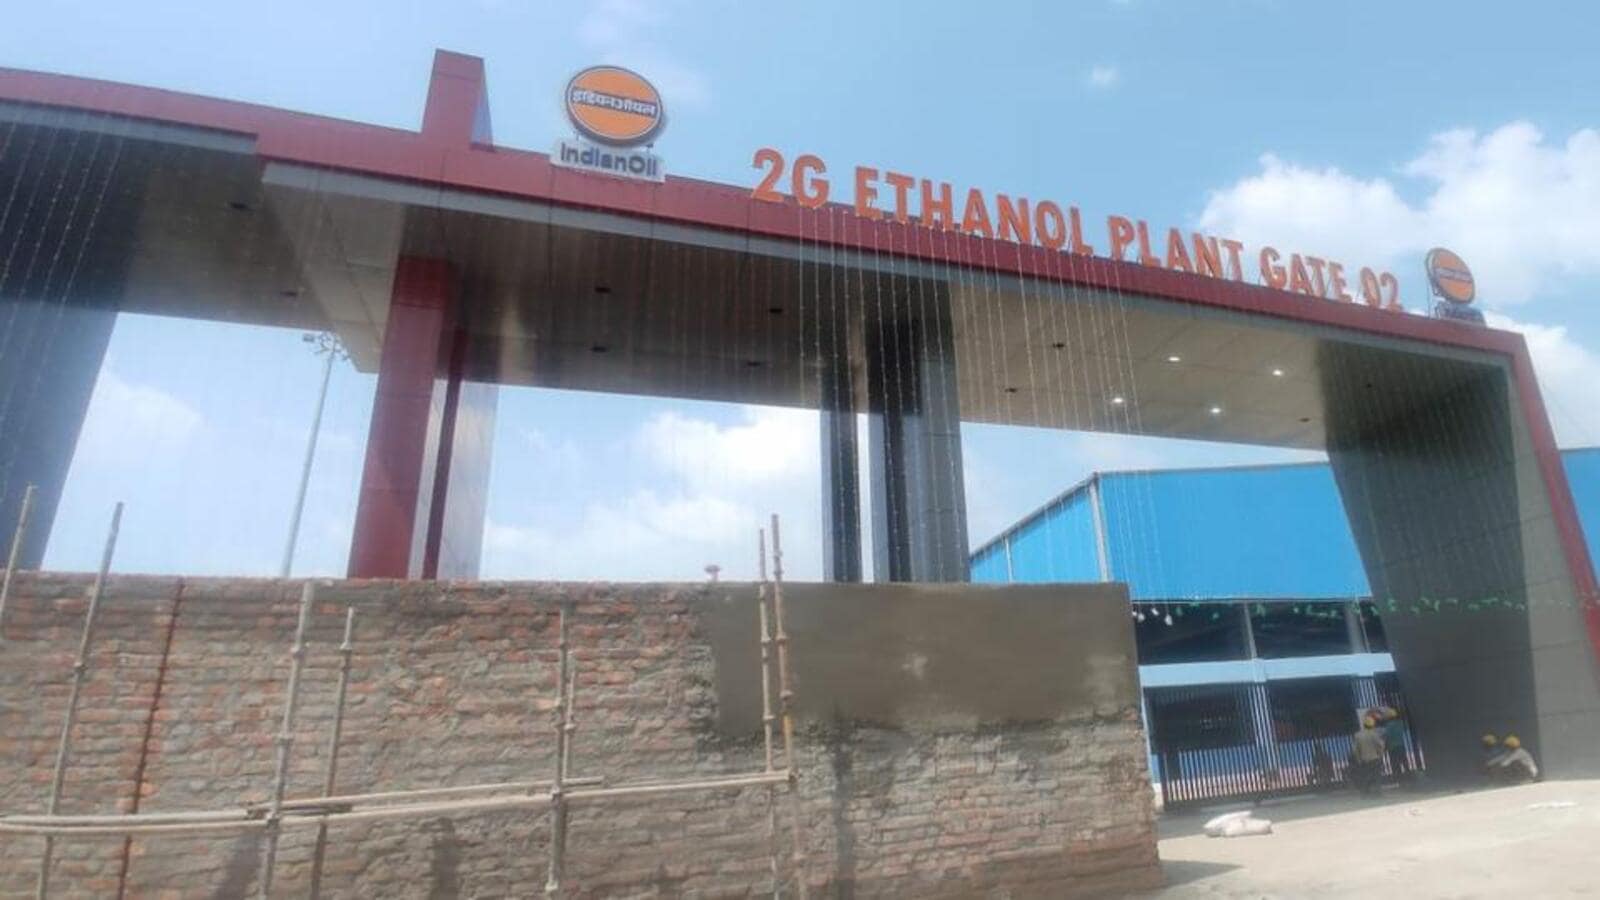 ₹900-crore 2G ethanol plant in Panipat will generate fuel from crop waste - Hindustan Times